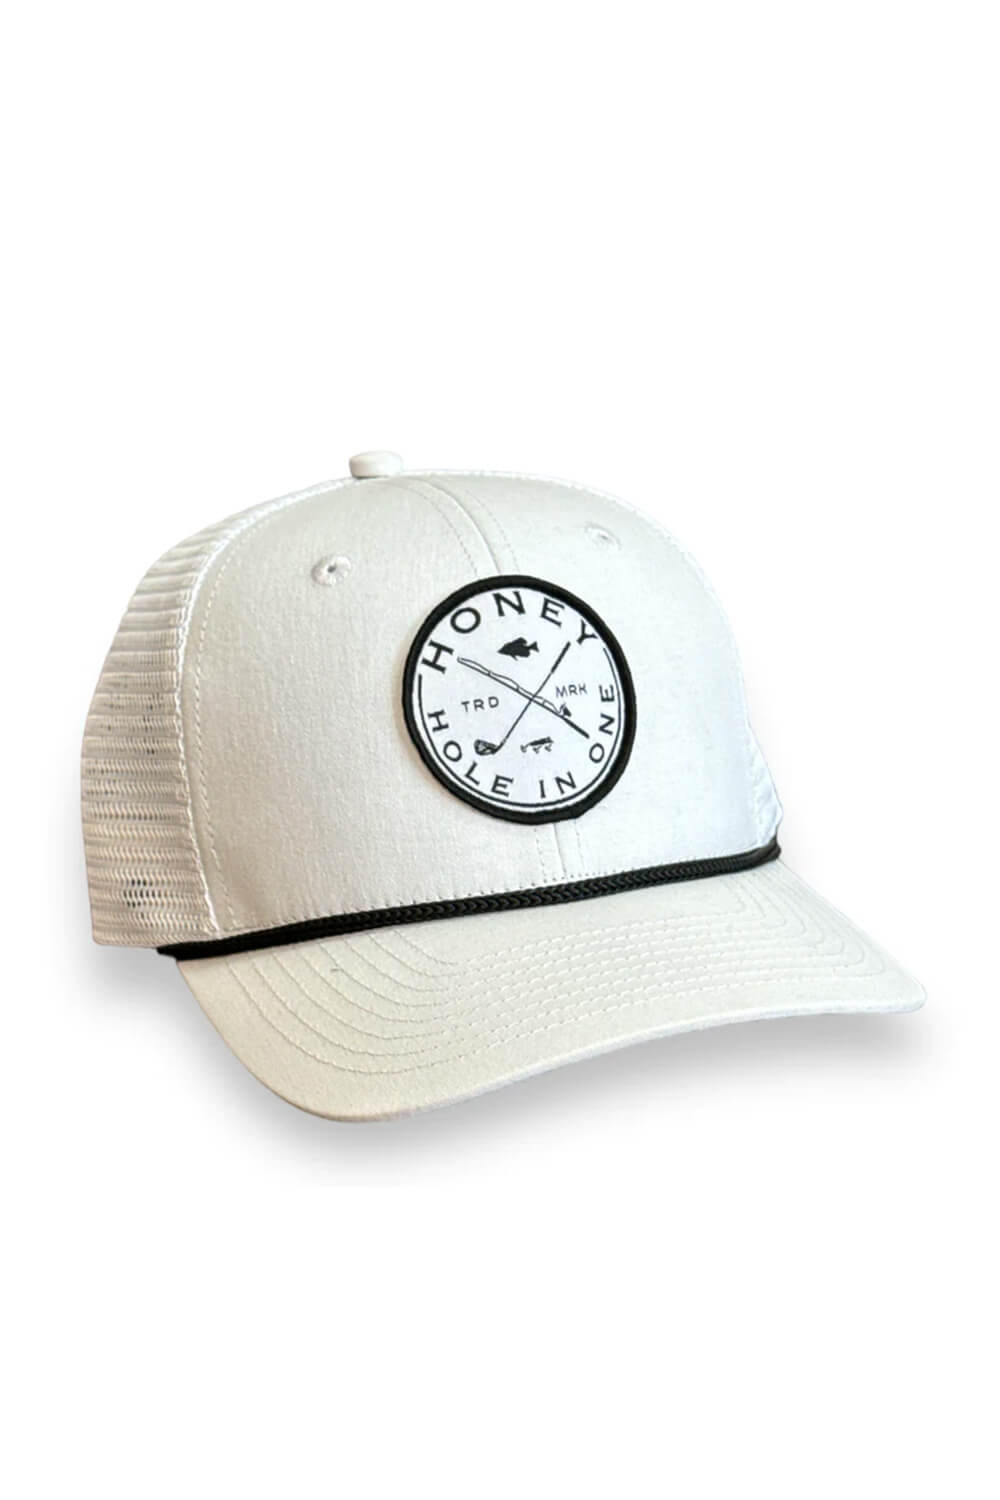 Honey Hole Hole-In-One Rope Trucker Hat for Men in White at Glik's , Os